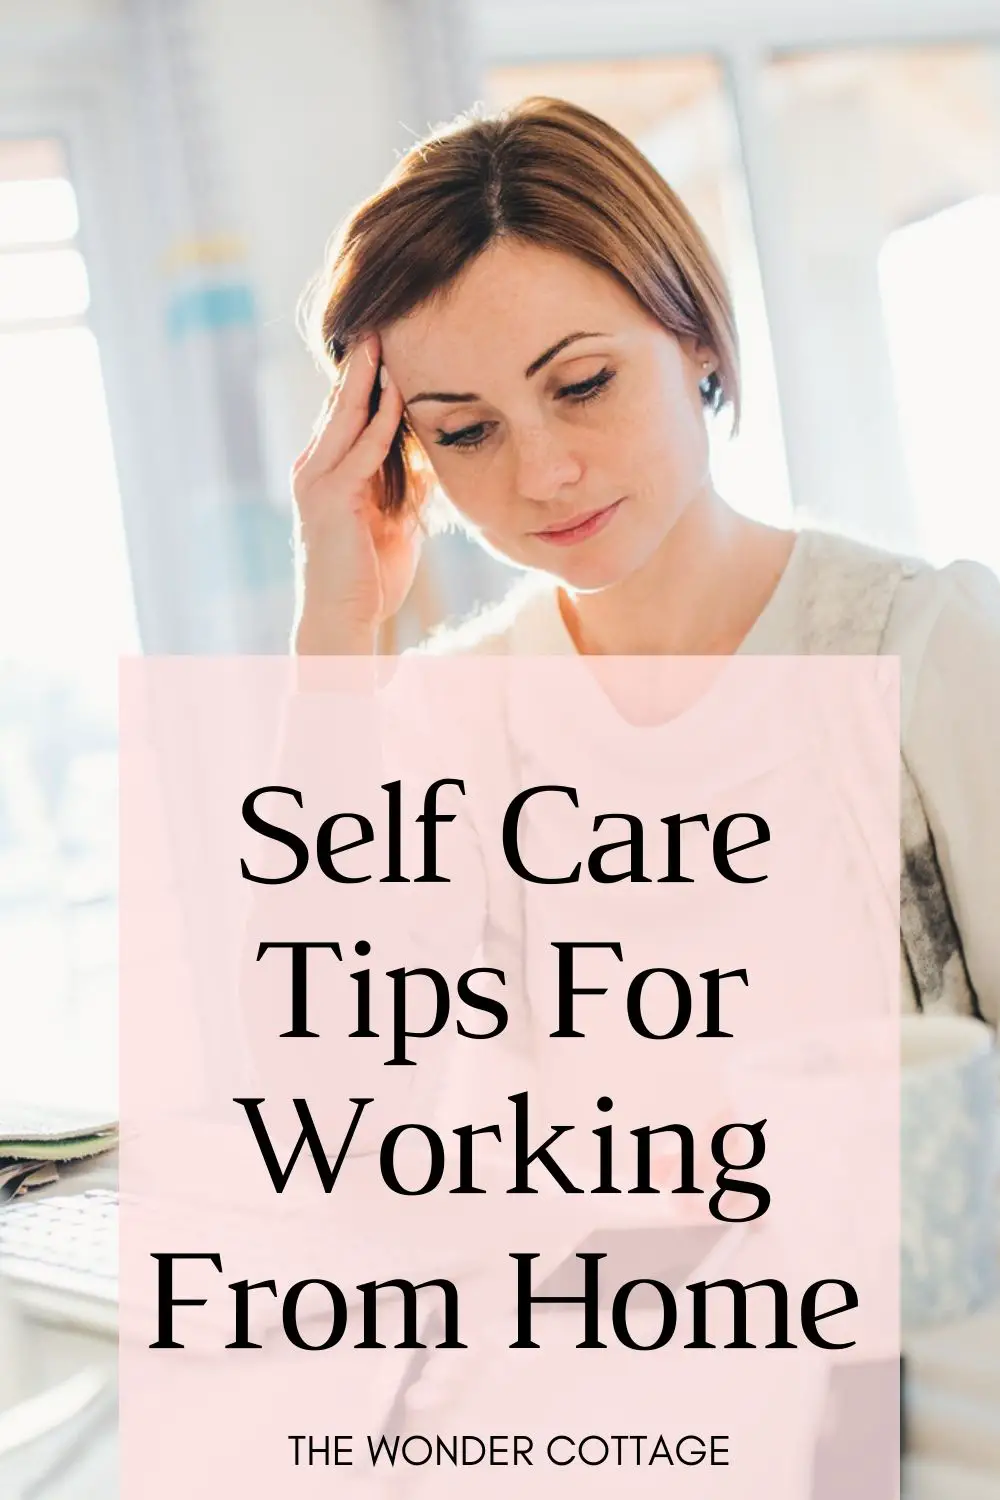 Self care tips for working from home